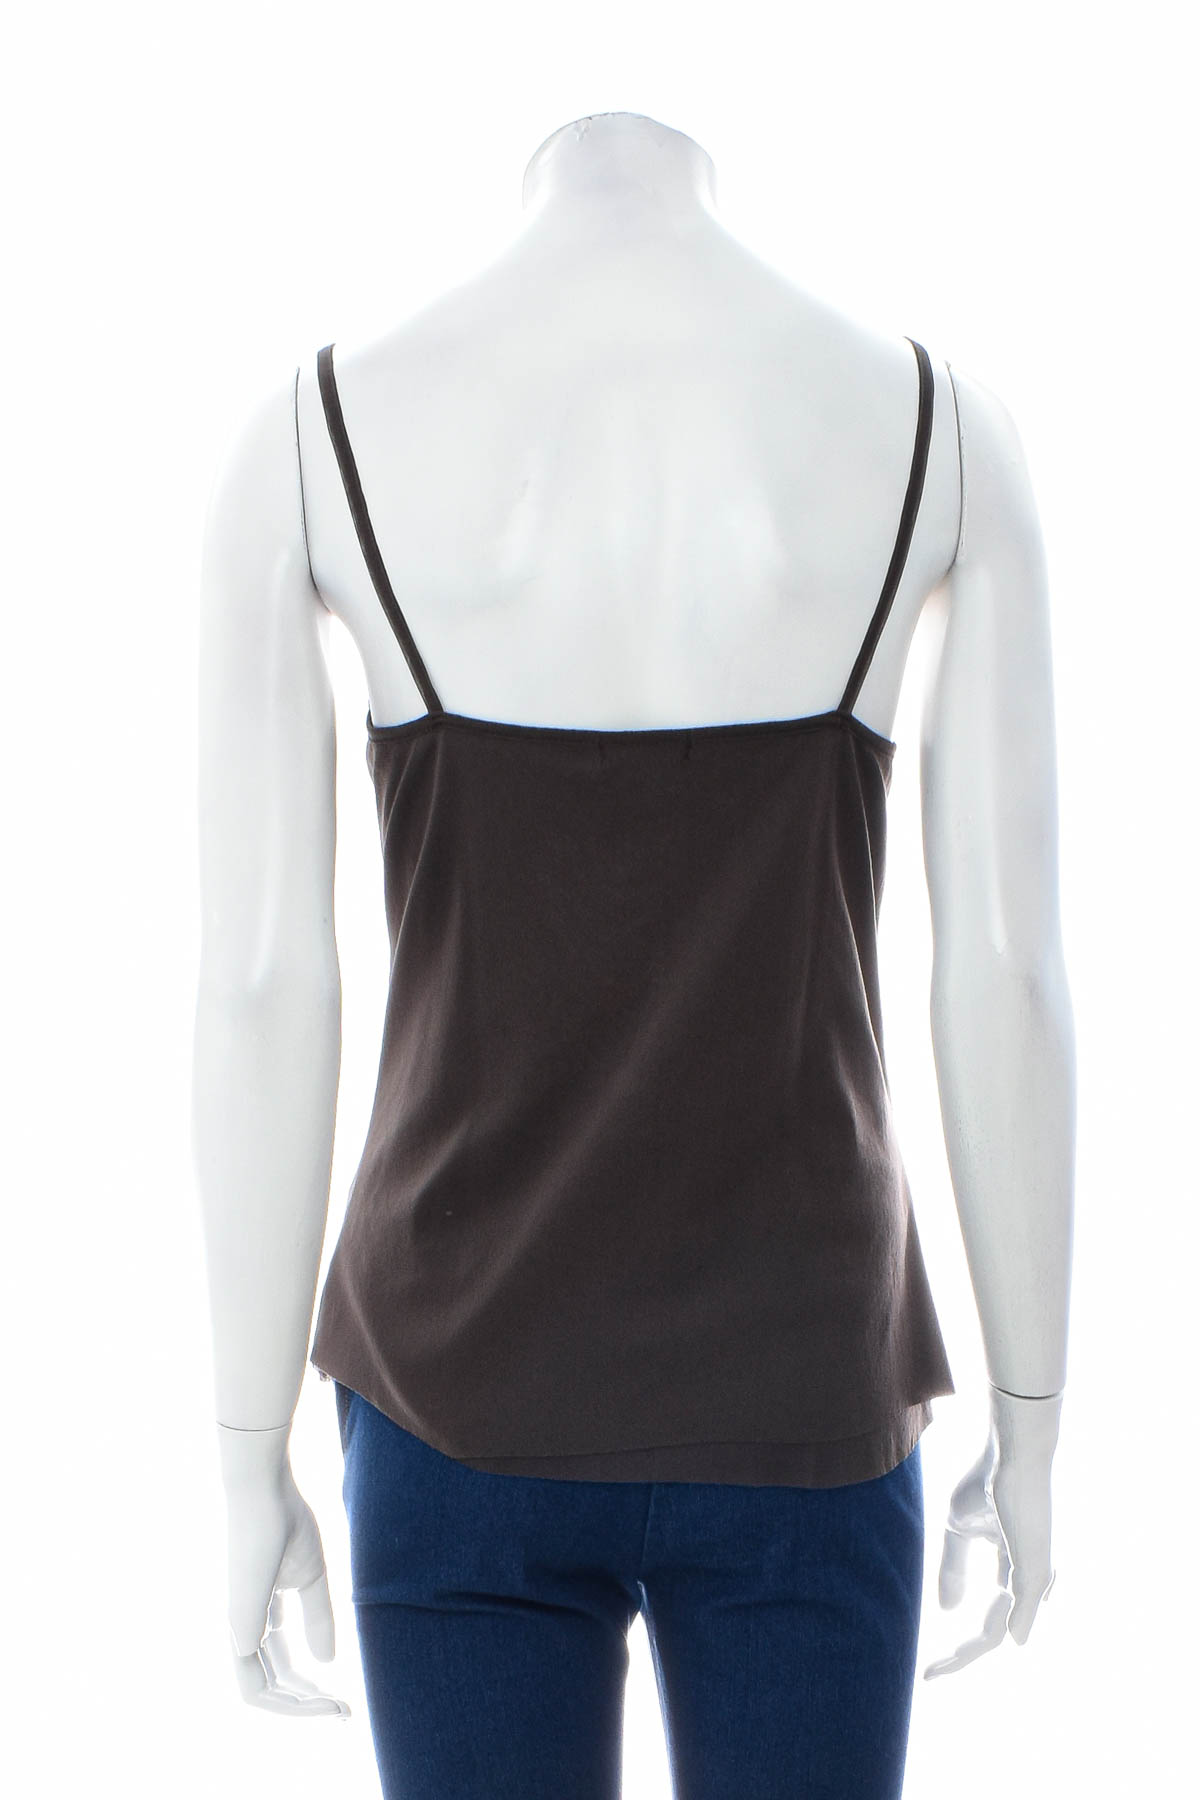 Women's top - Sisters Point - 1